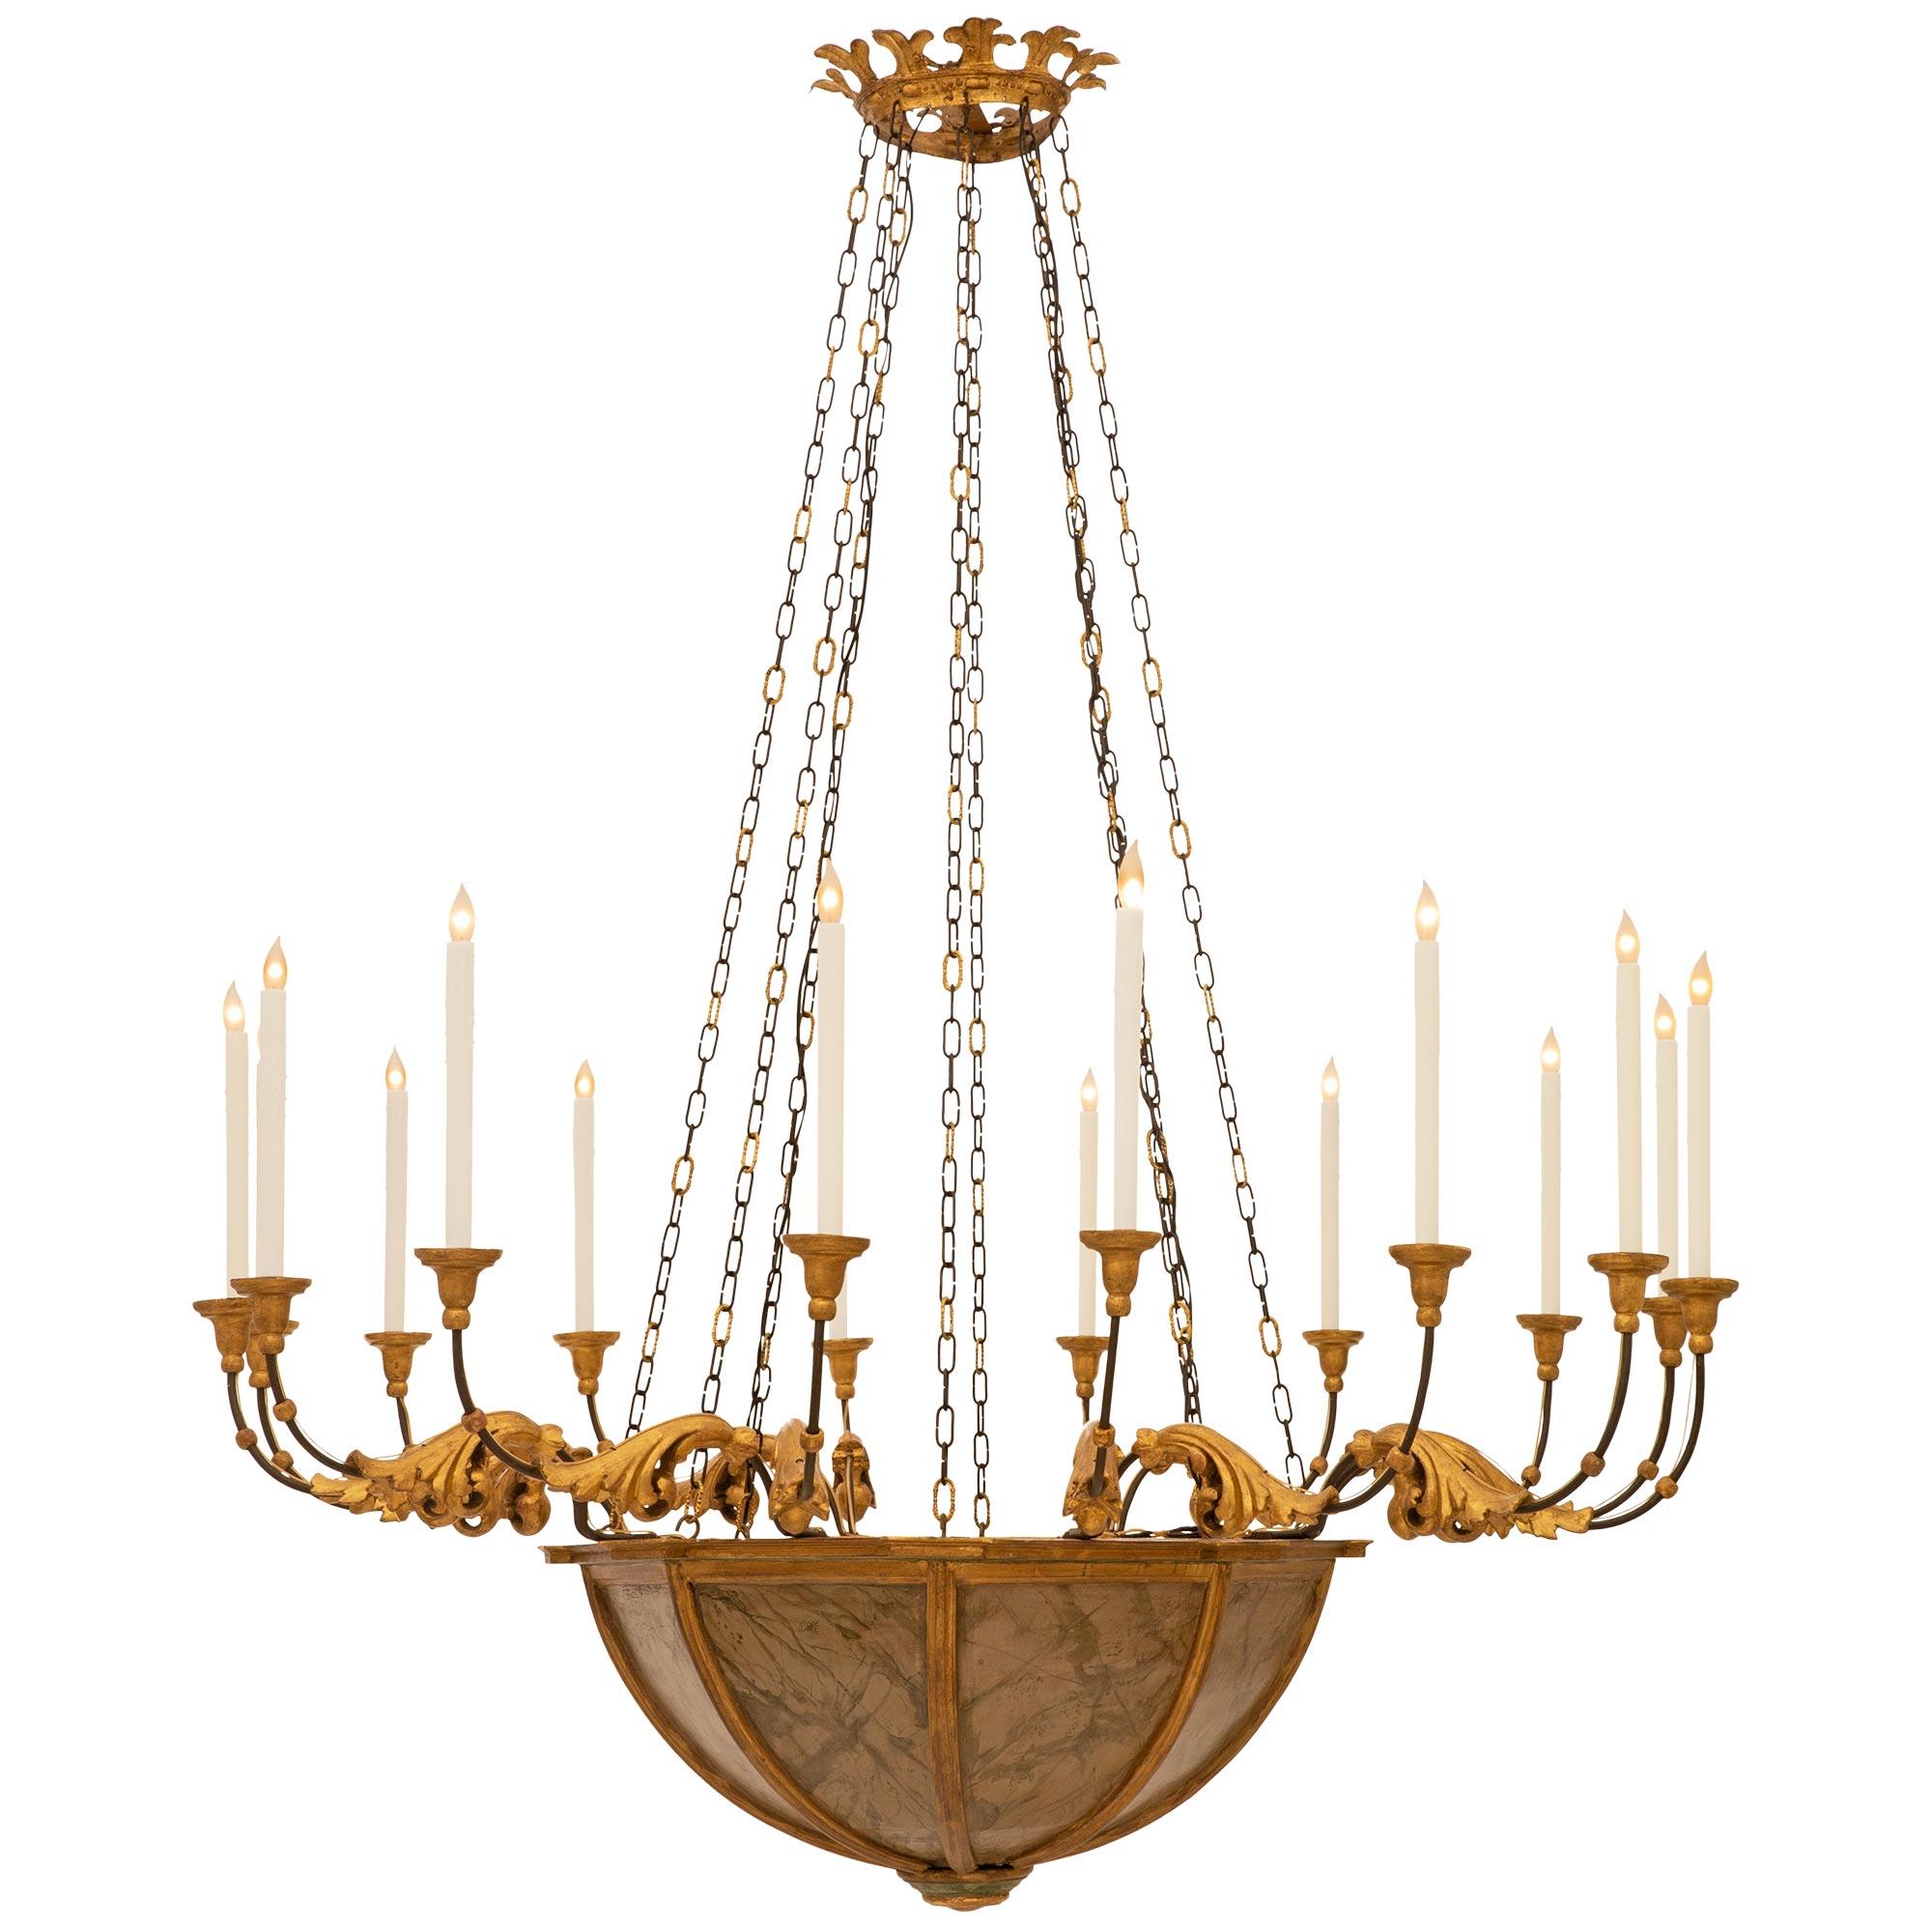 A large scale and elegantly detailed Italian 19th century Baroque st. Faux Painted marble, Giltwood, and Wrought Iron chandelier. This stately sixteen arm sixteen light chandelier is centered by a circular Giltwood and faux painted marble bottom